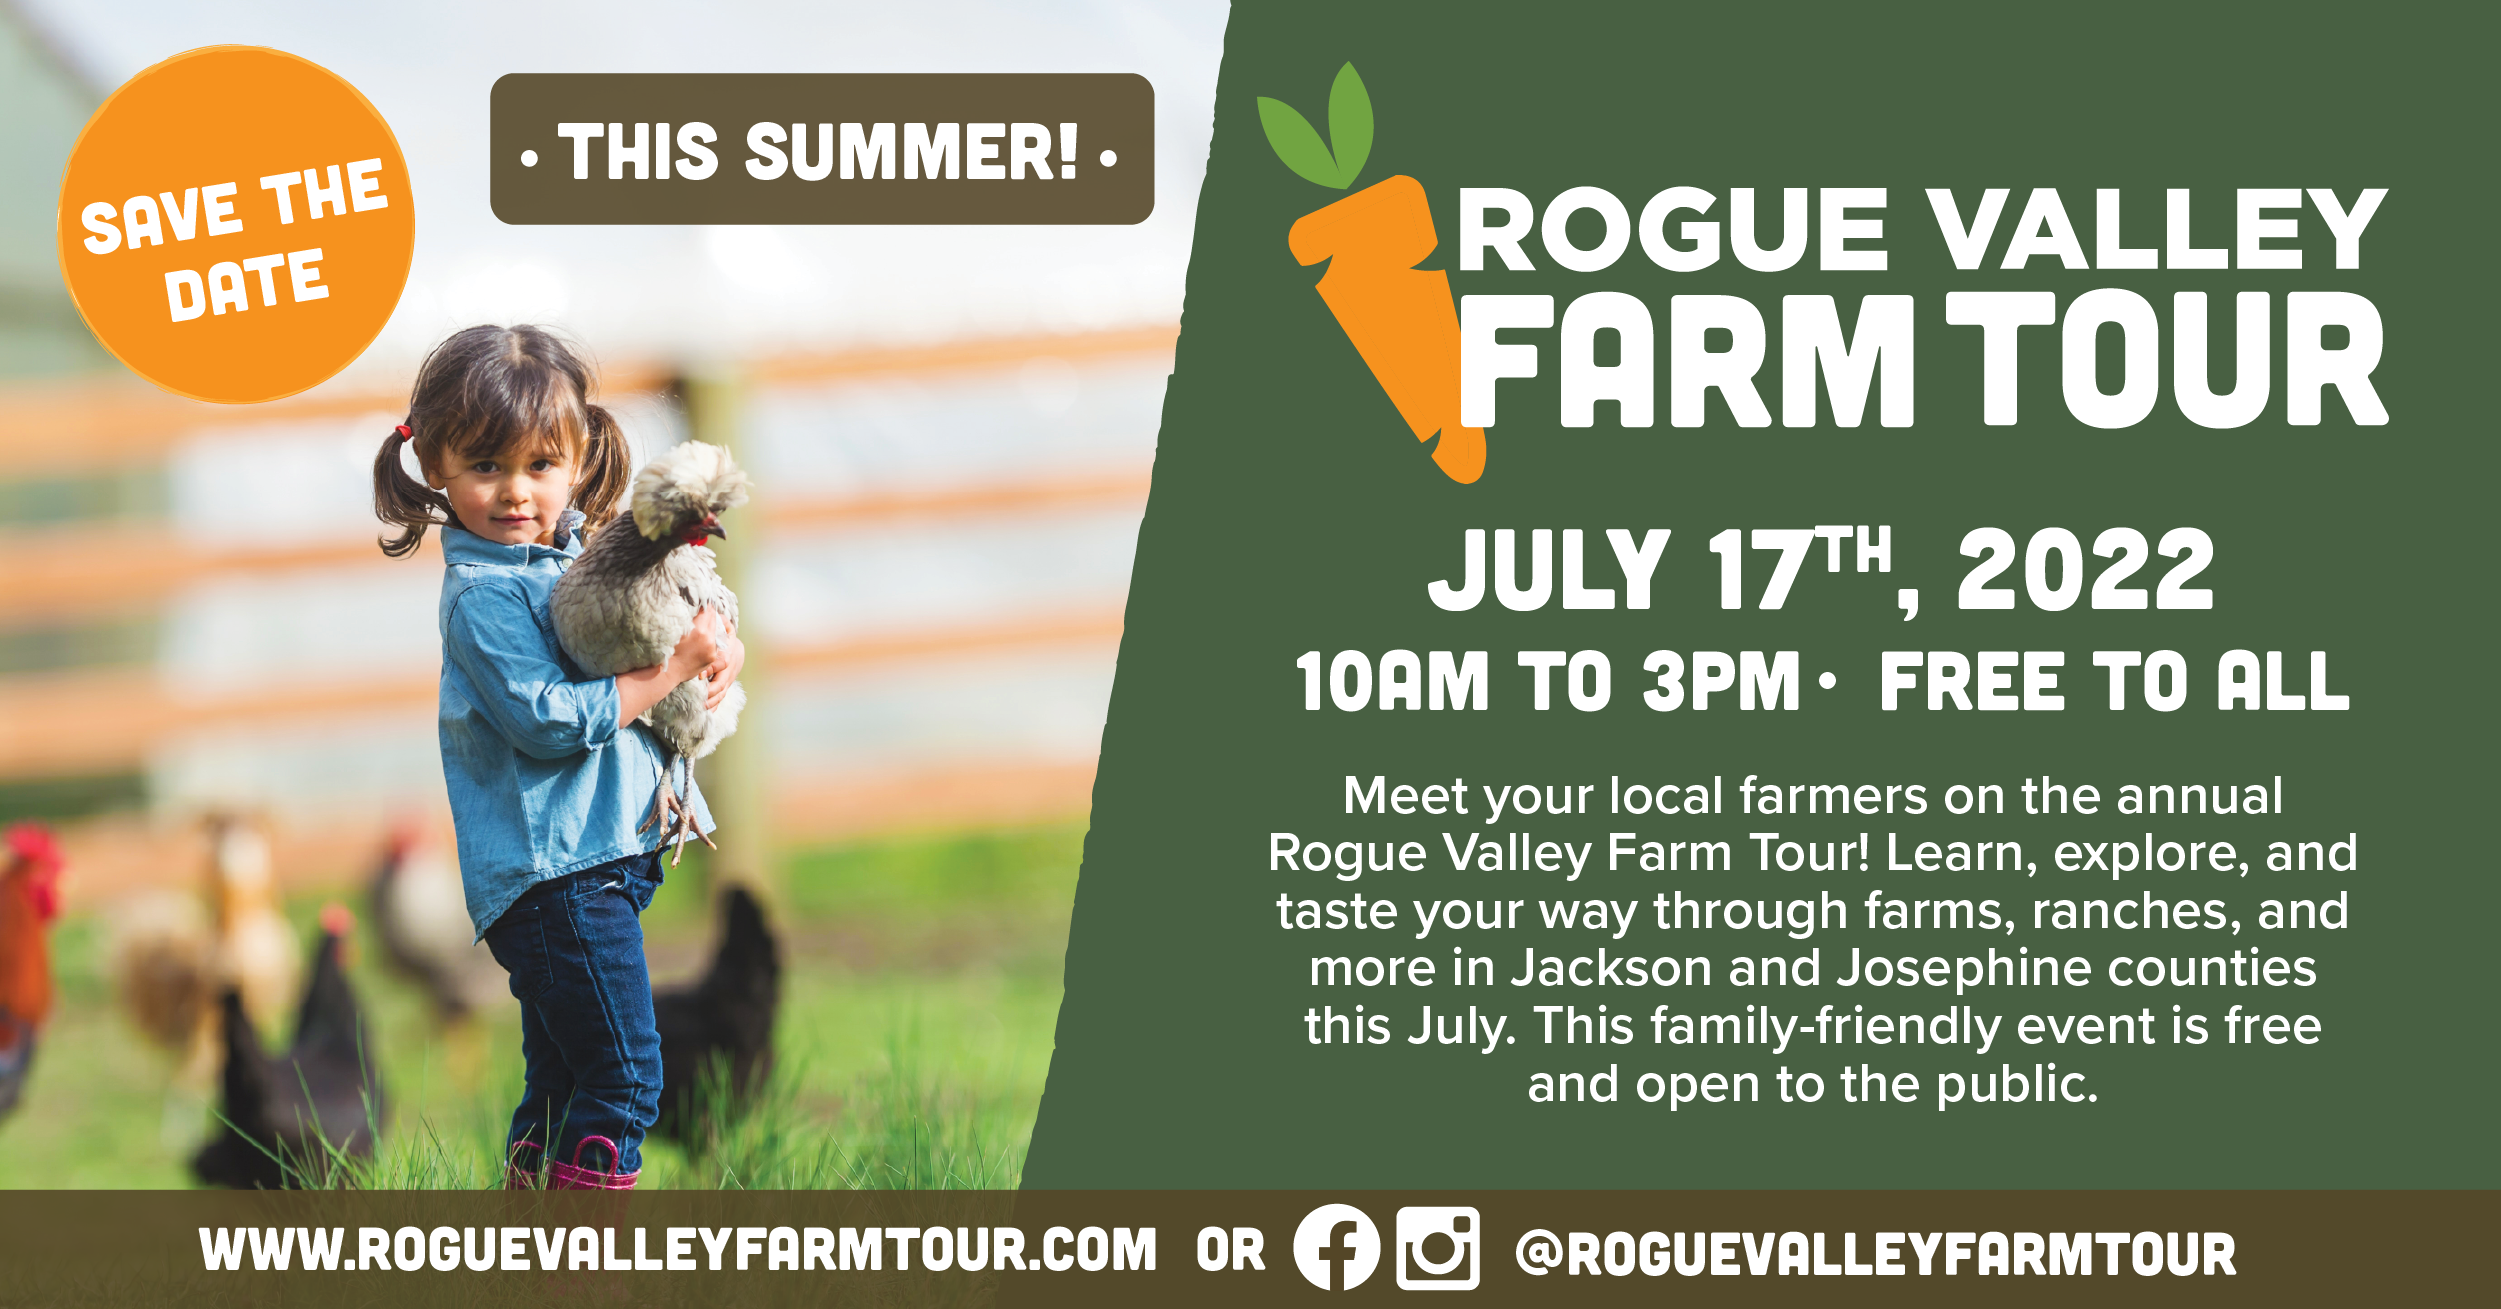 The Rogue Valley Farm Tour is on July 17th!